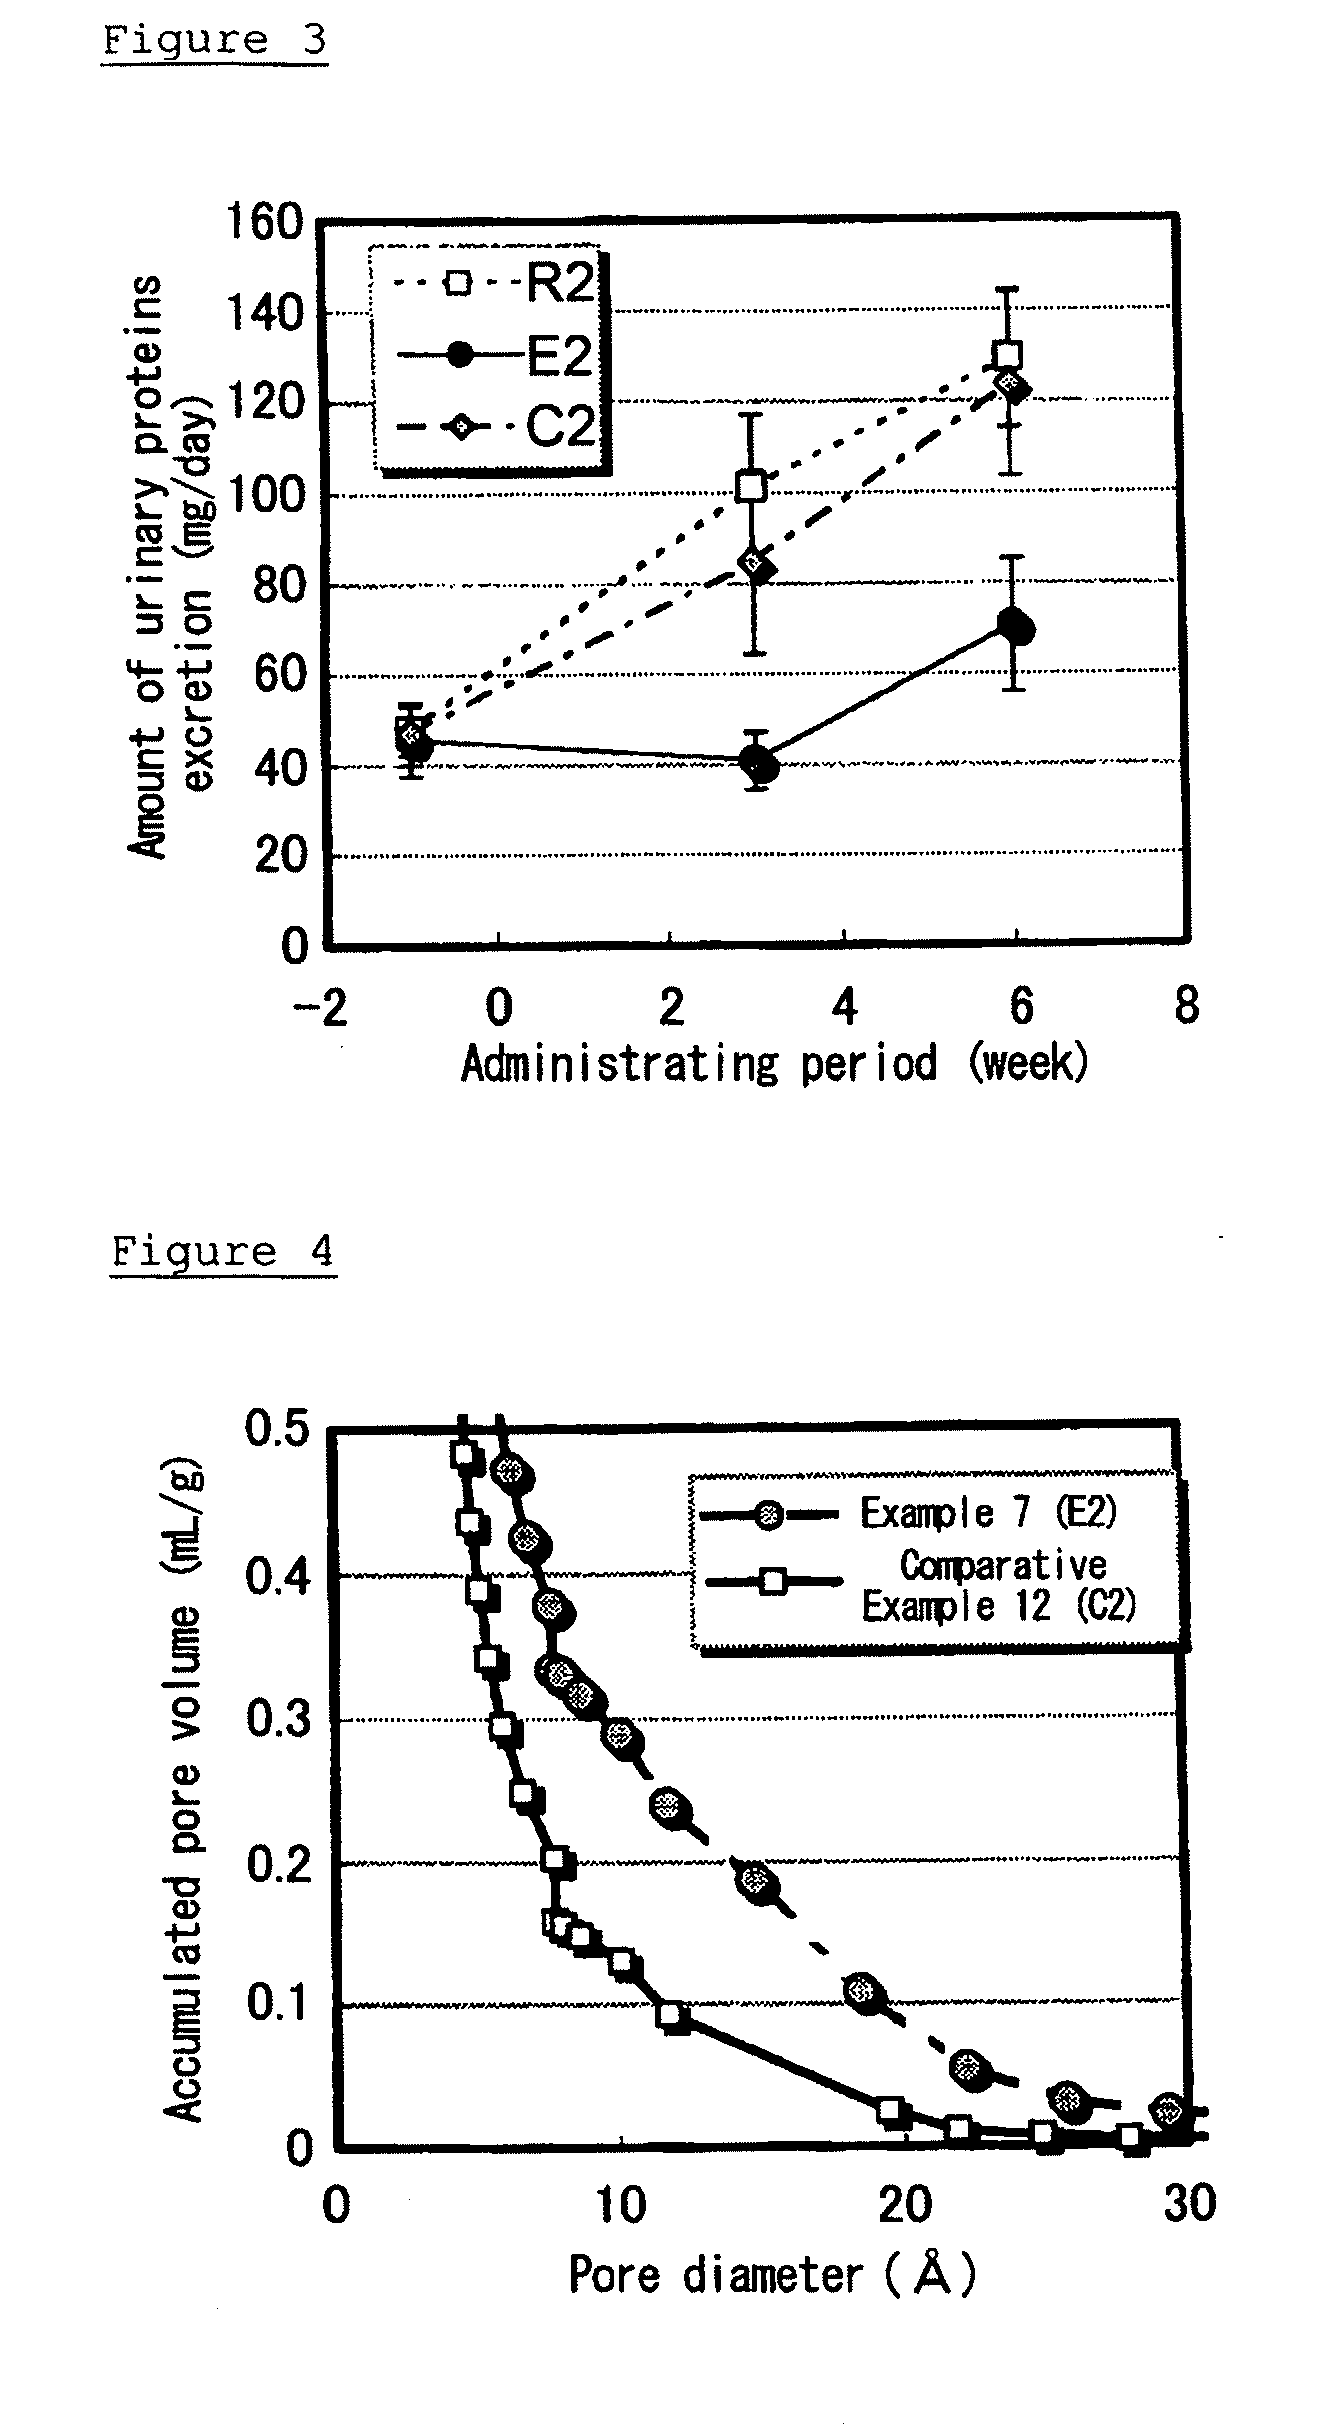 Adsorbent for an oral administration, and agent for treating or preventing renal or liver disease